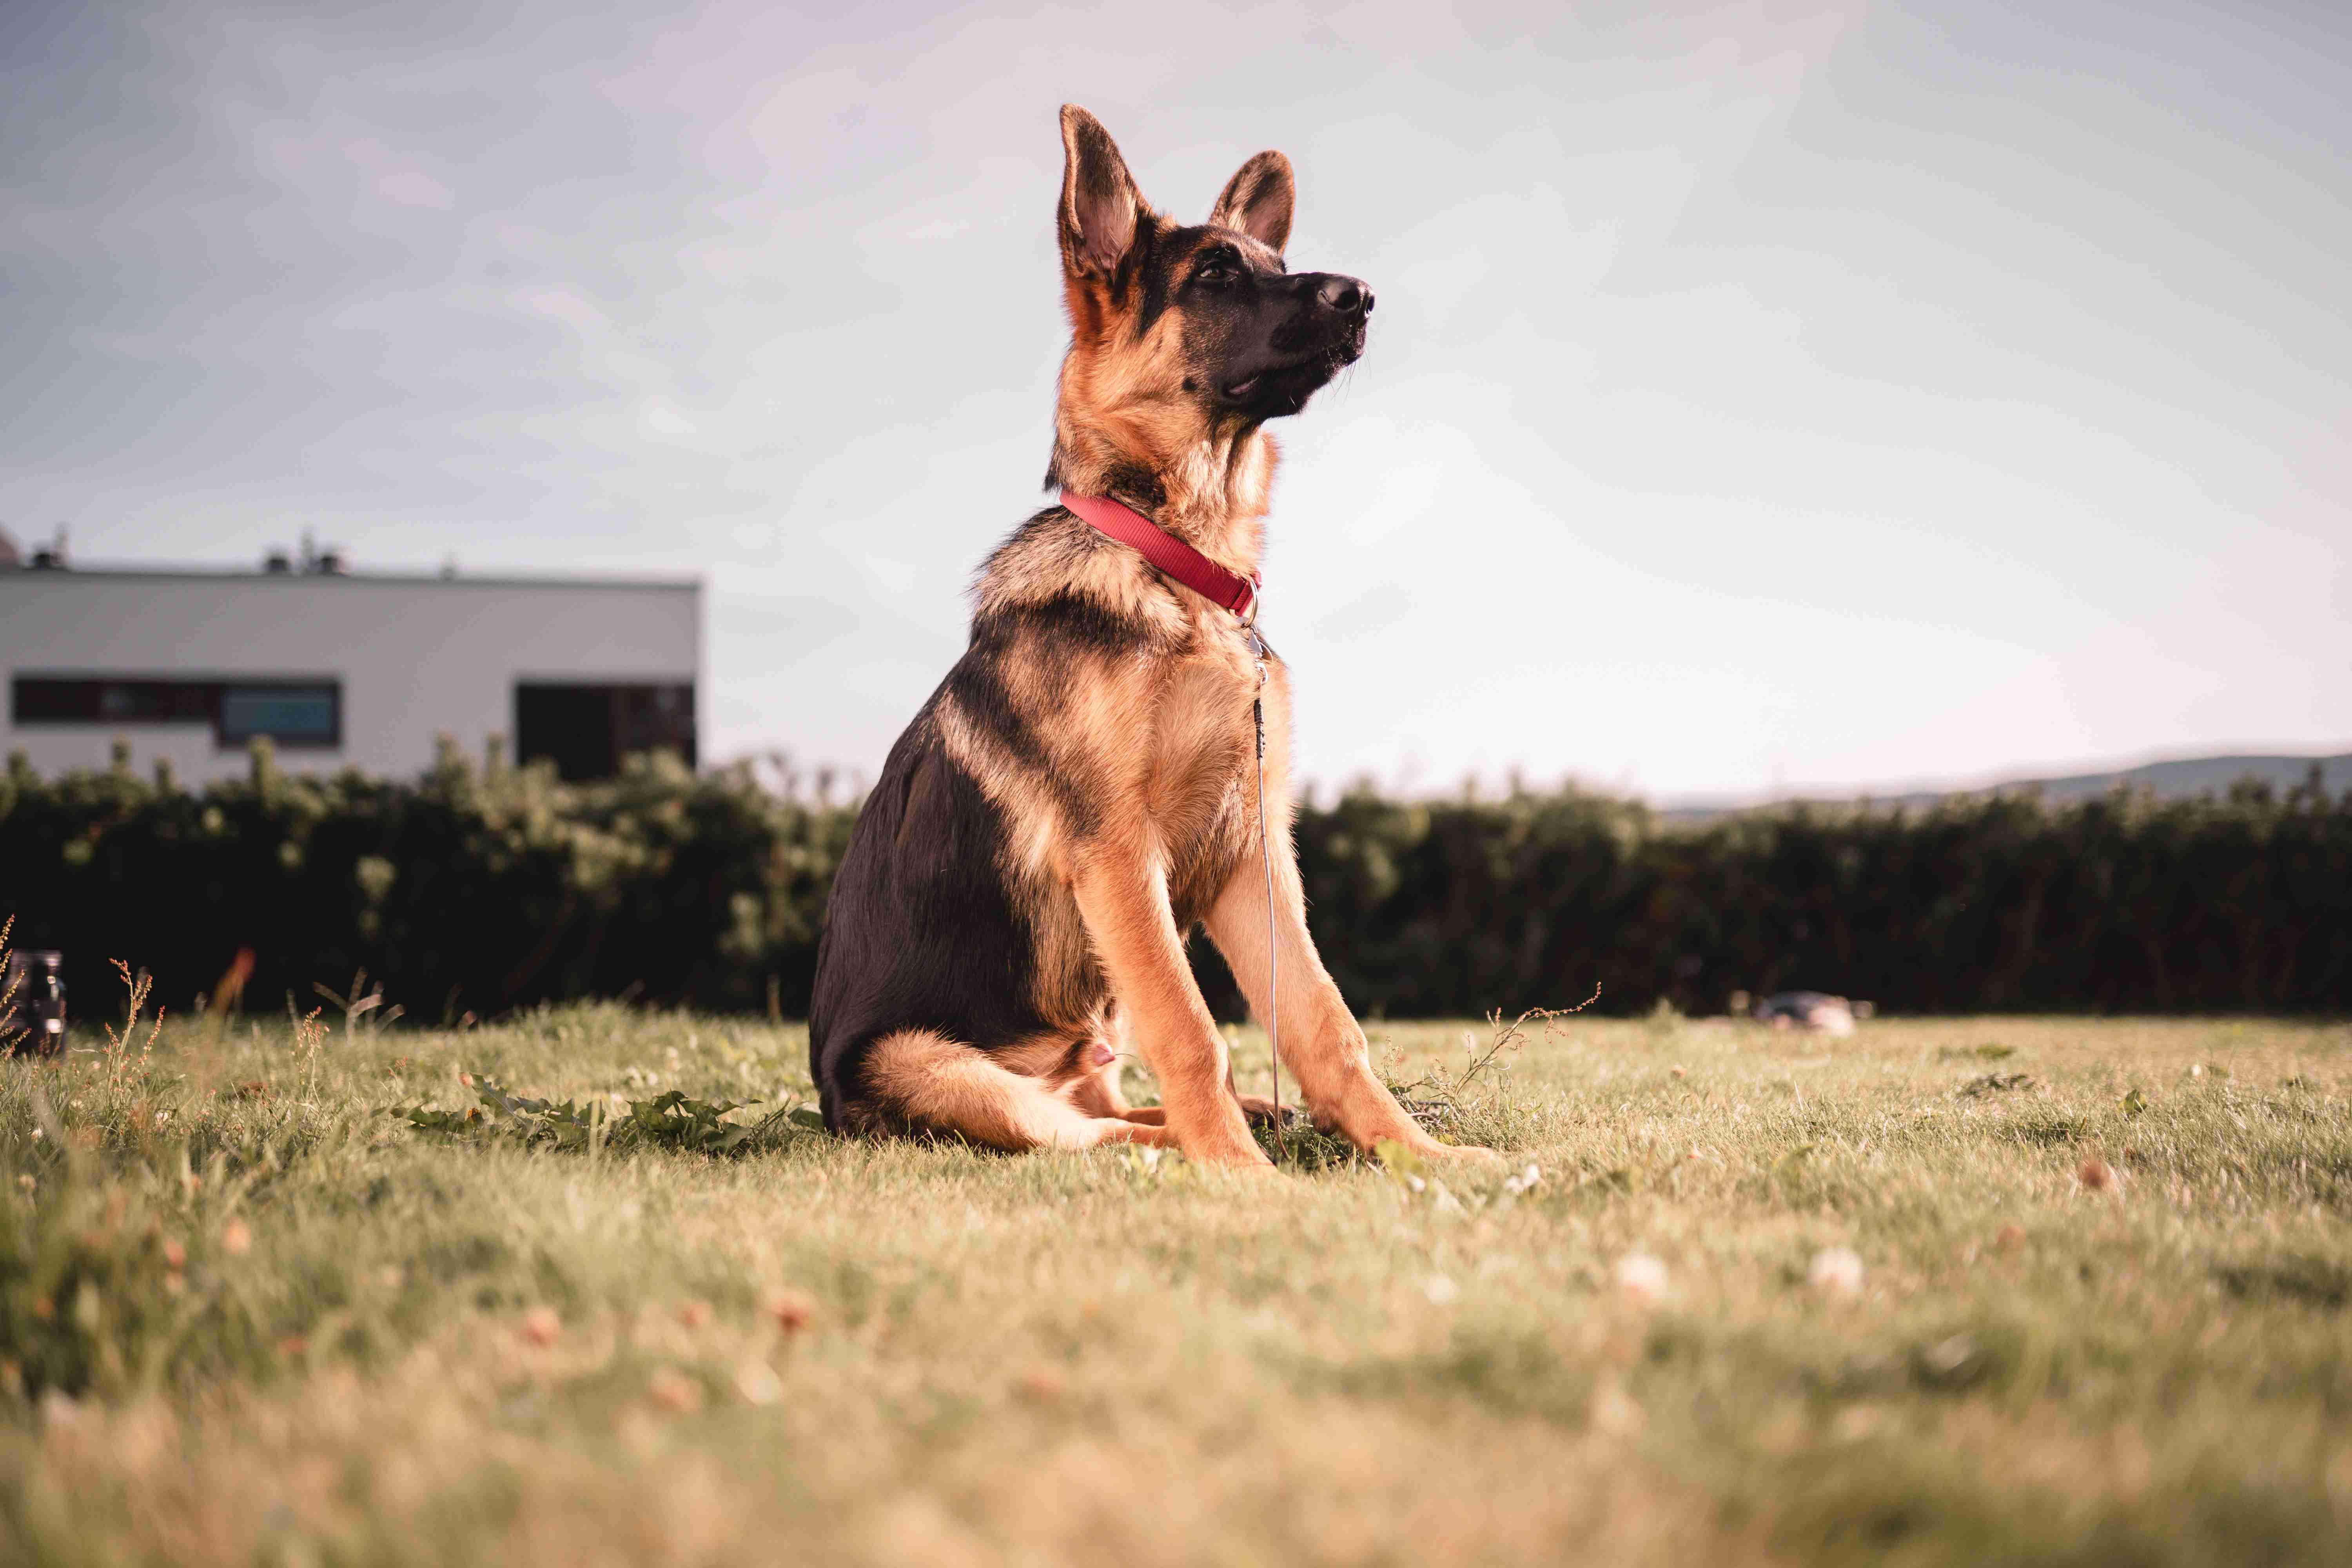 Can German shepherds be trained to become diabetic alert dogs?